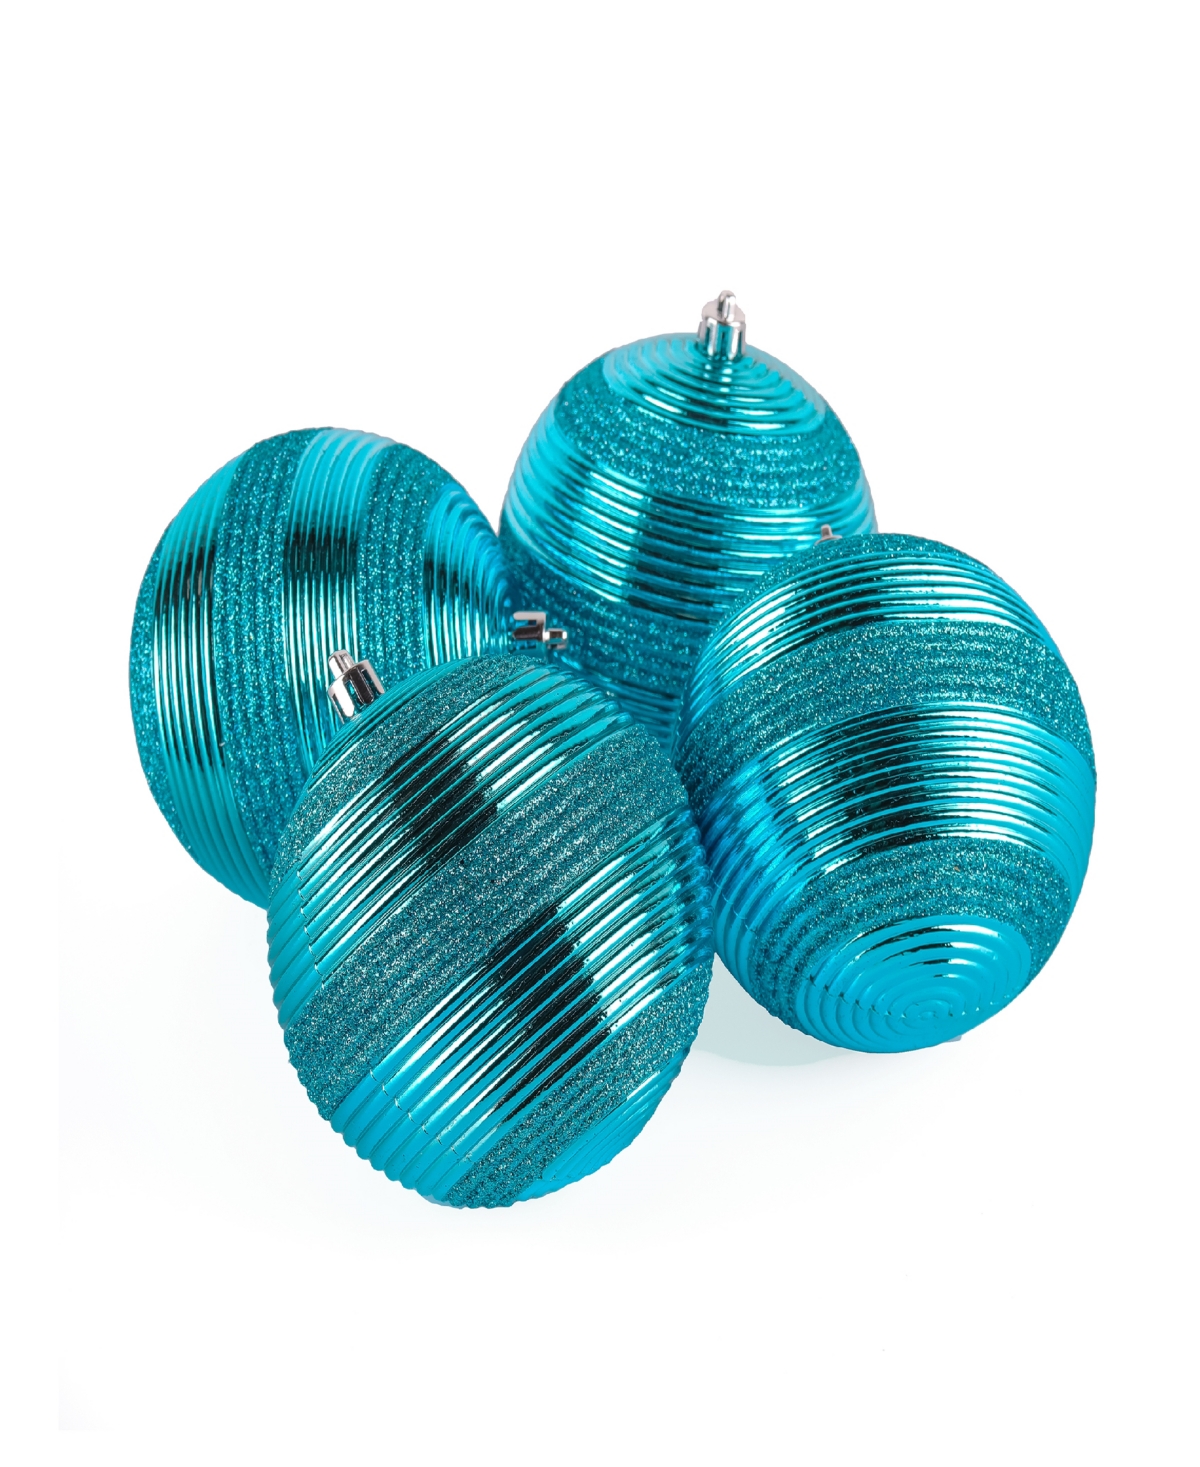 National Tree Company First Traditions 4 Piece Shatterproof Swirling Ornaments In Blue